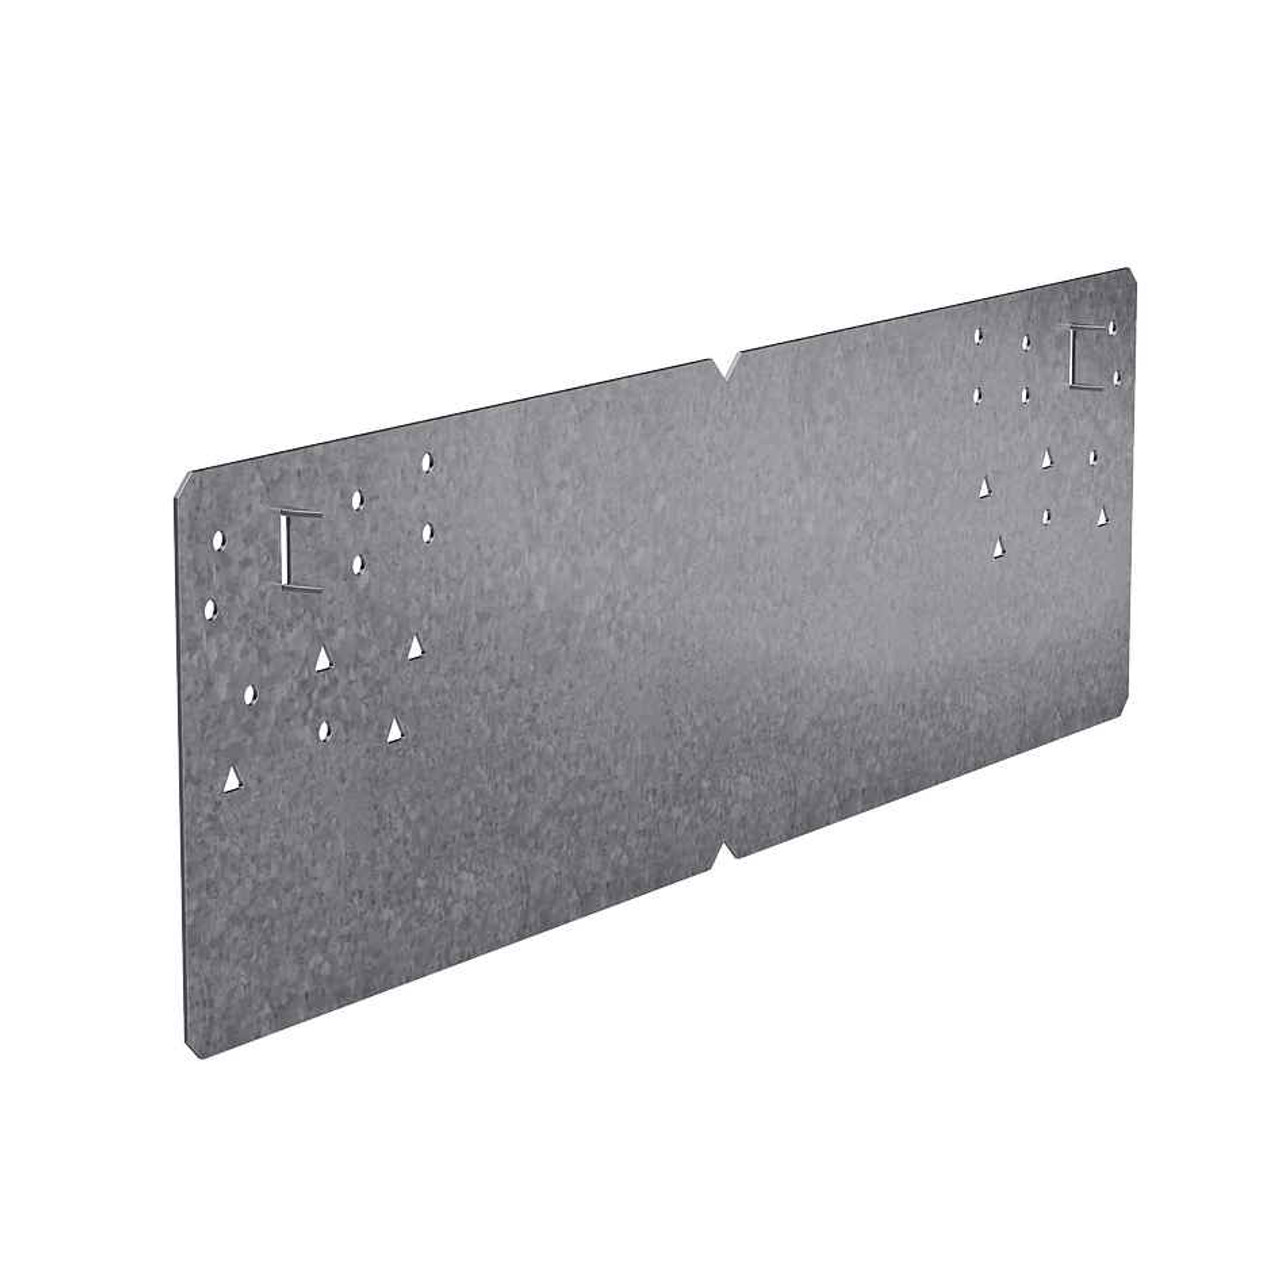 Simpson Strong-Tie PSPN516Z 5 x 16-5/16 Protecting Shield Plate ZMAX 10 Pk